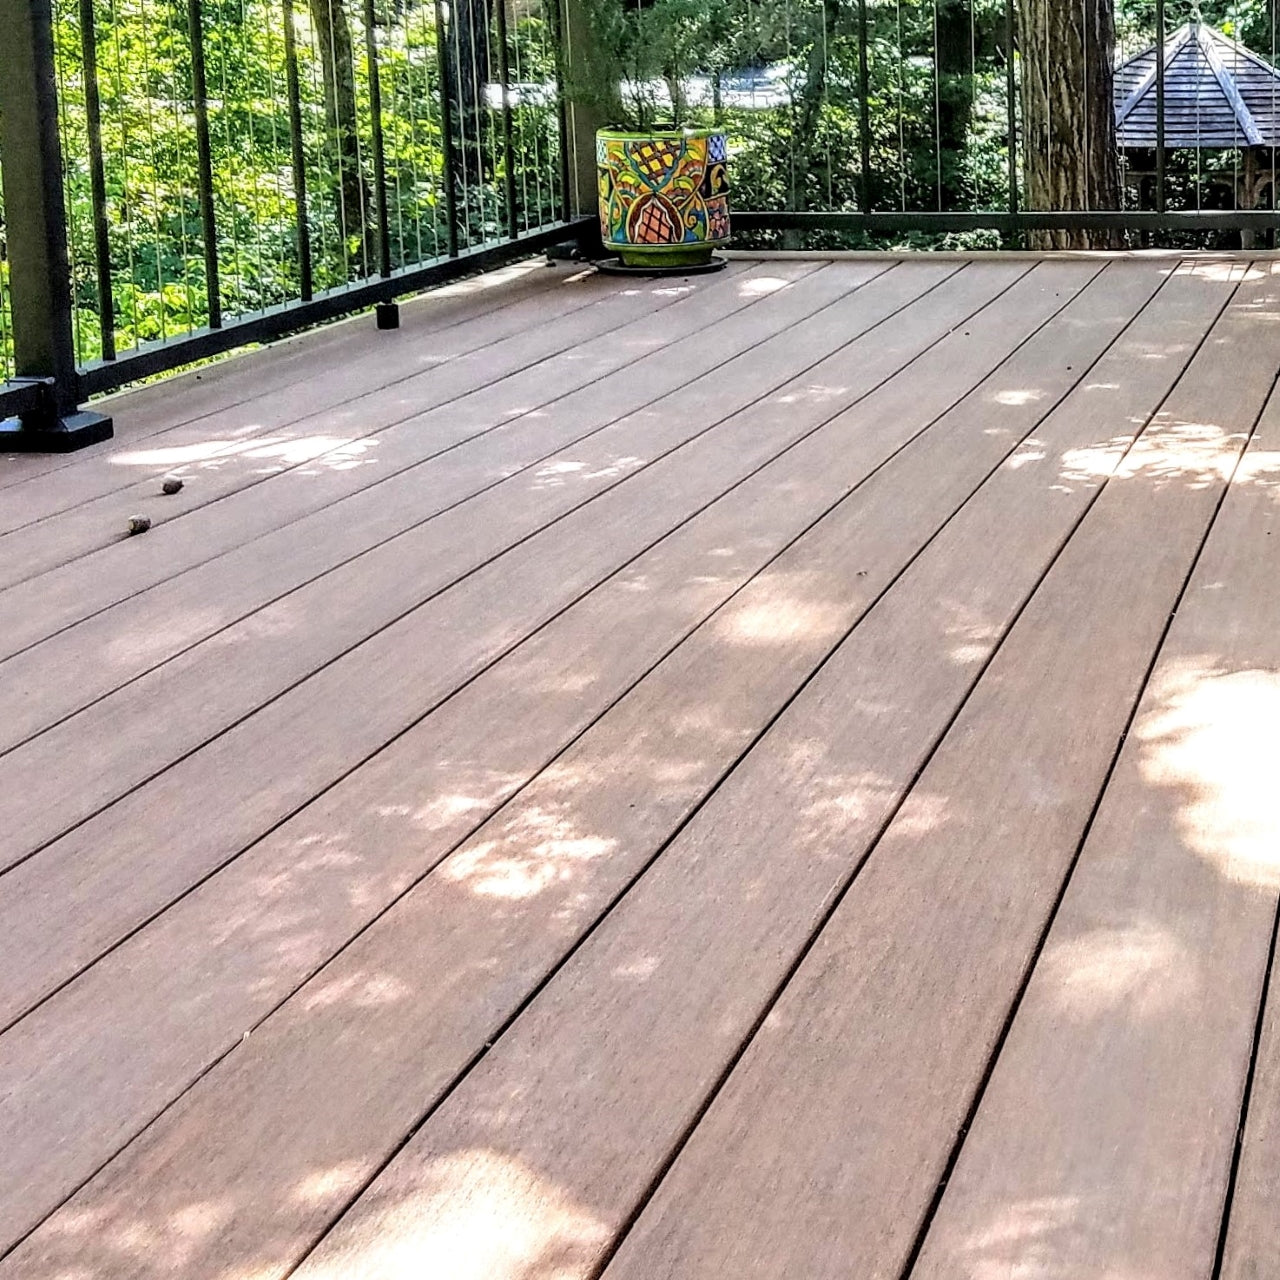 PVC Decking and Composite Decking are Synthetic man made deck types designed to last long do not rot don't split, and are warrantied to last